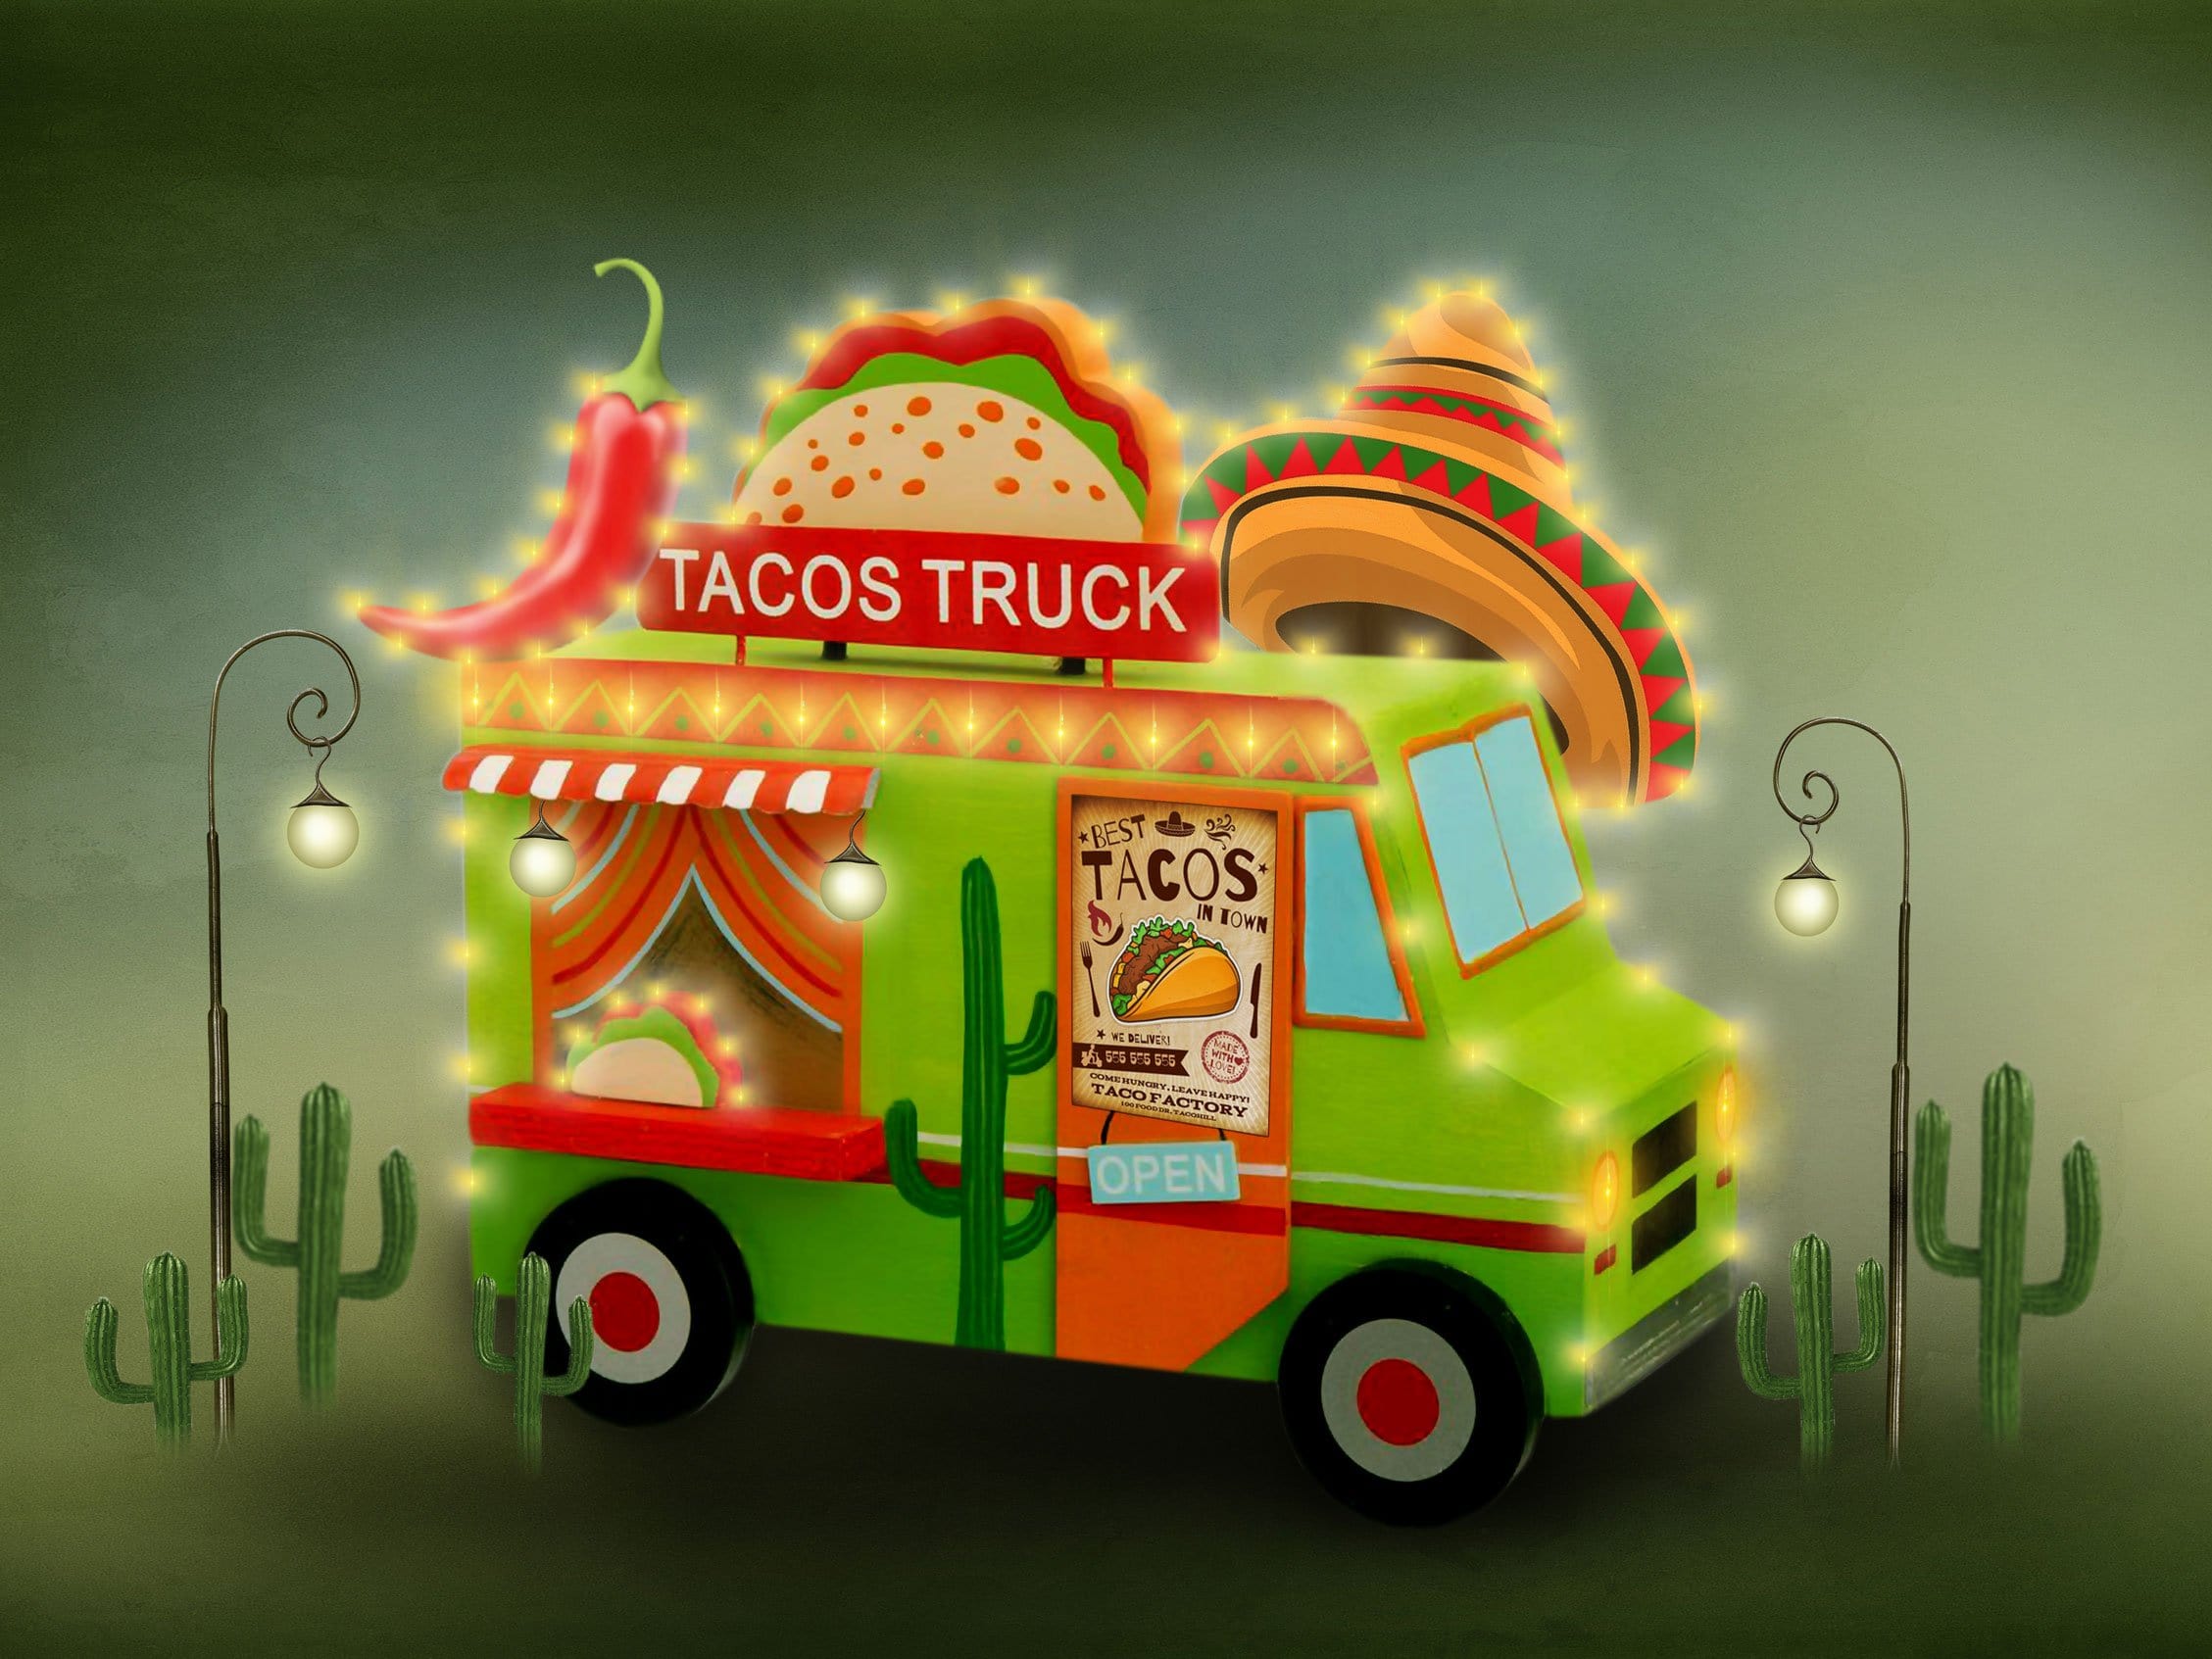 Kate Cake Smash Tacos Truck Diner Chef Backdrop Designed by Rosabell Photography